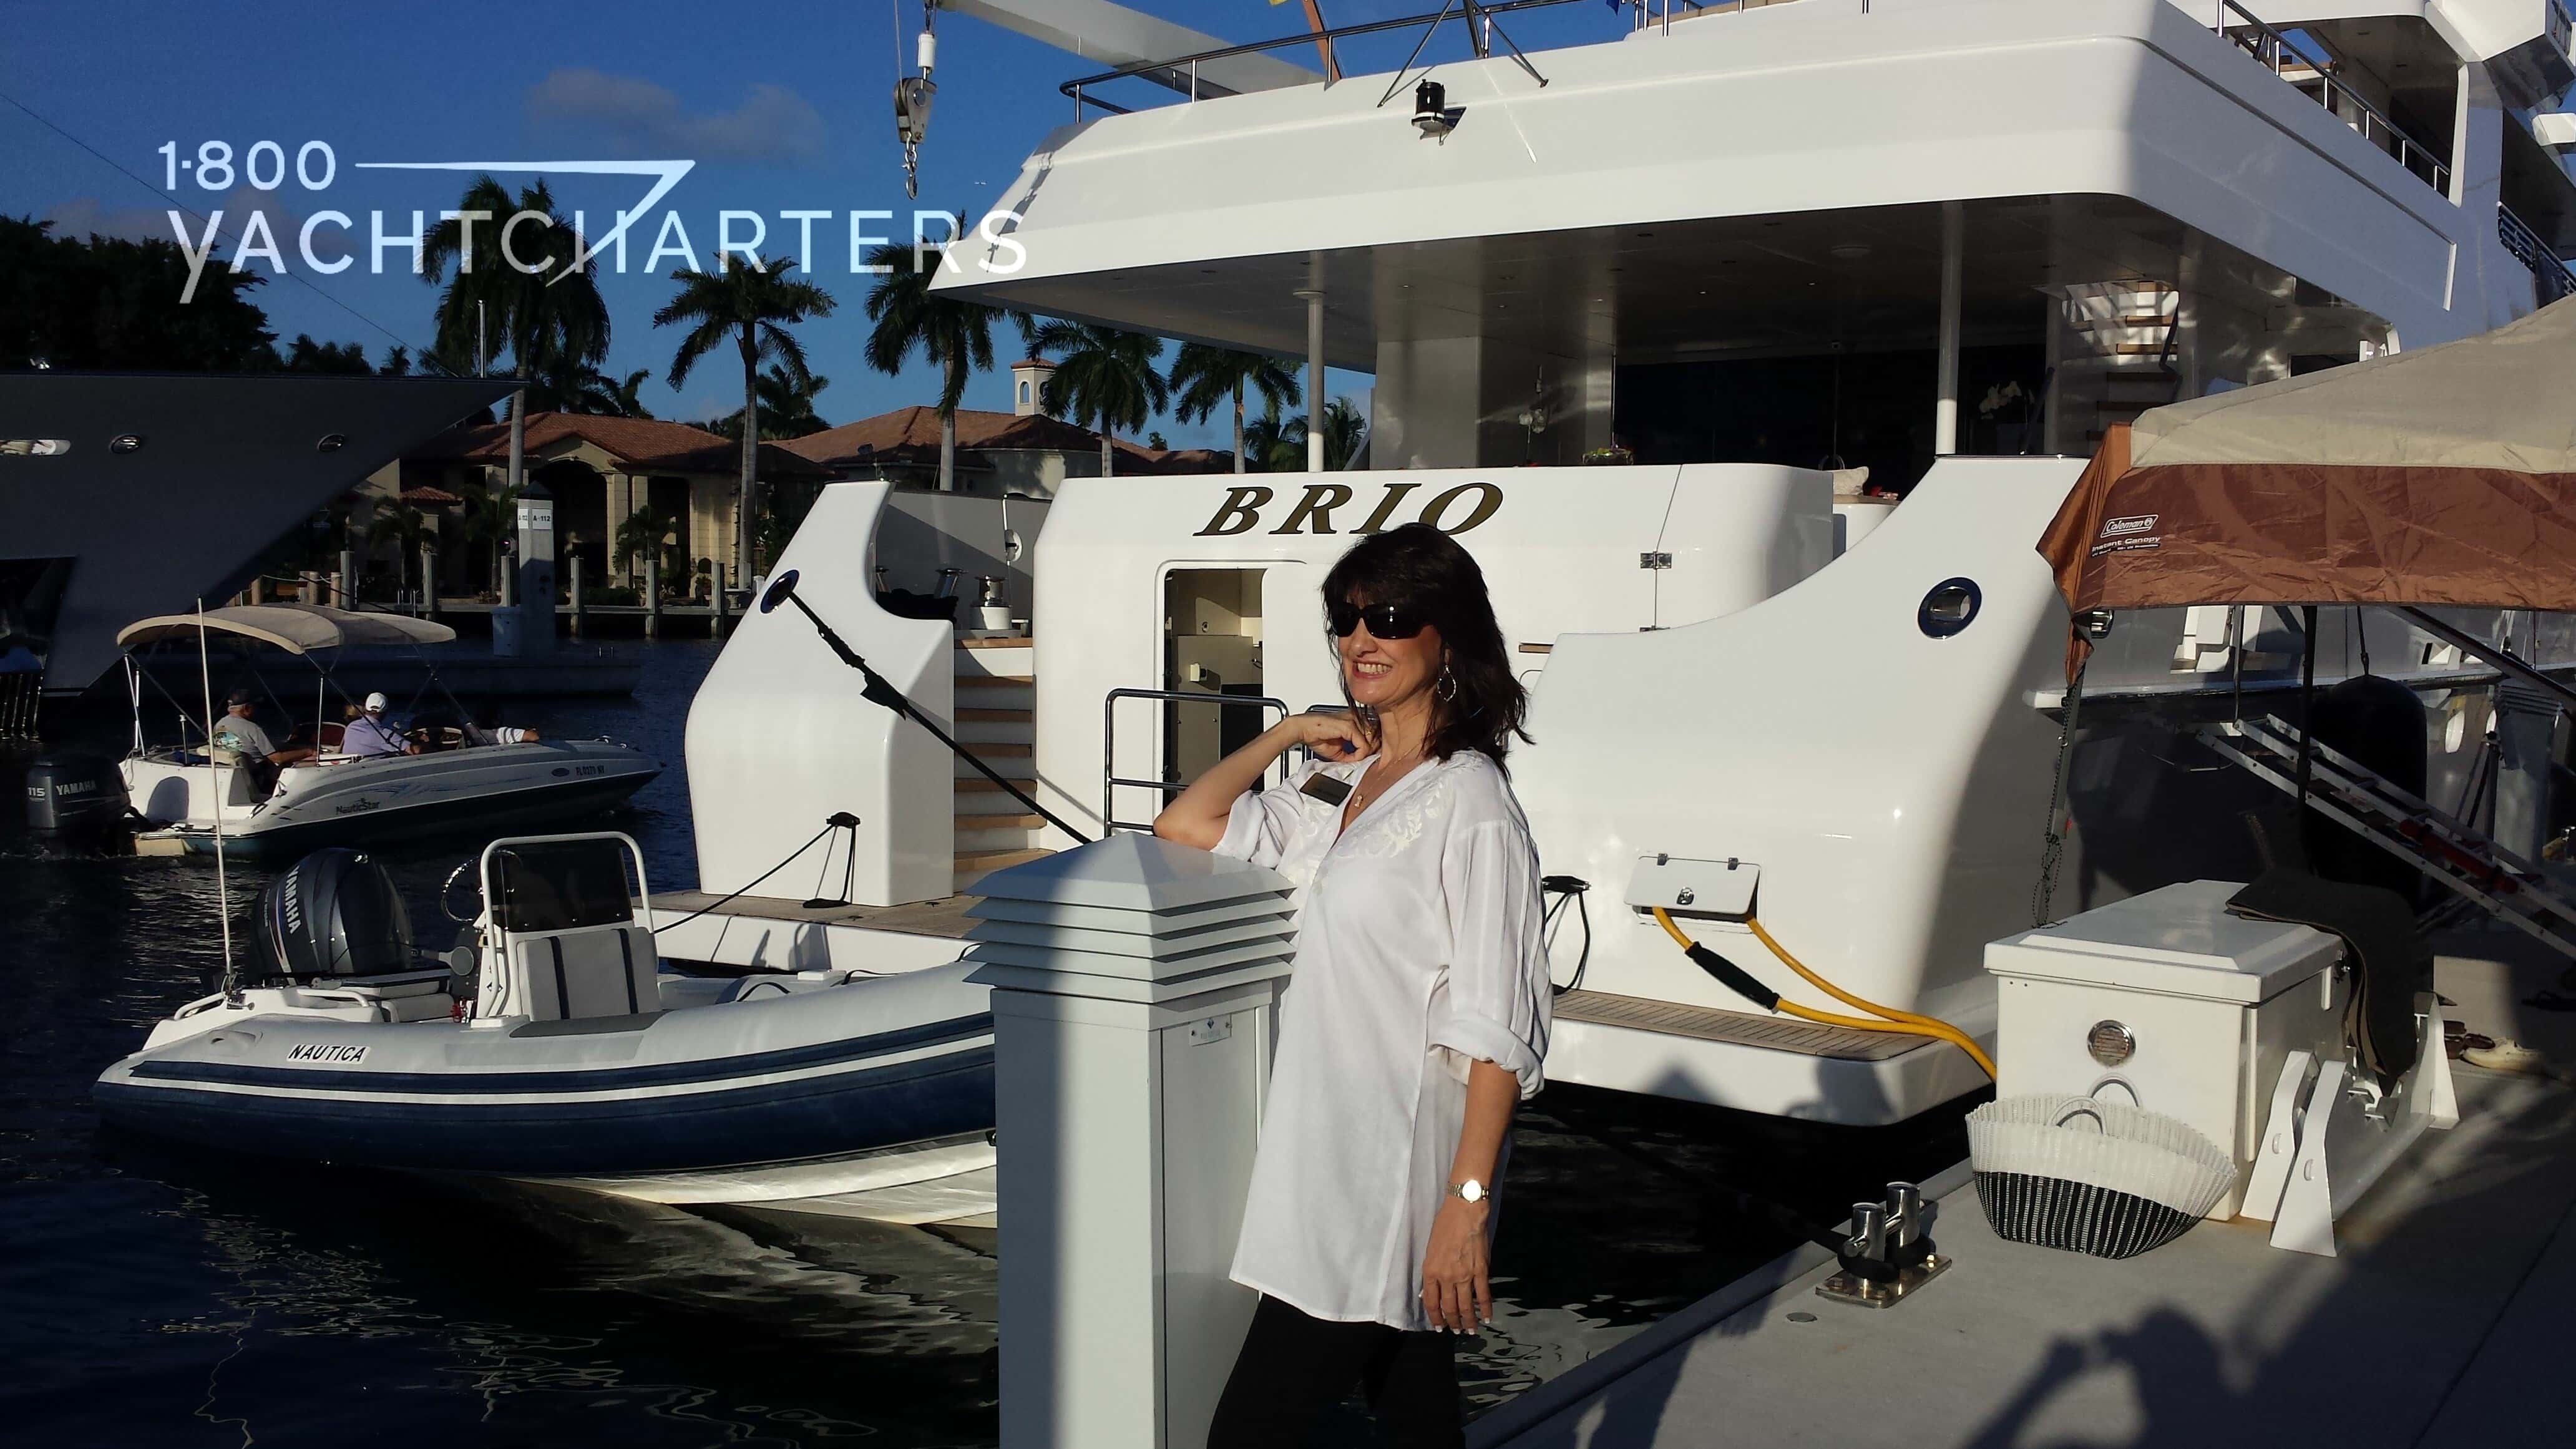 Photograph of Jana Sheeder on the dock at a superyacht show. She is looking toward the left side of the photograph. There is a large white yacht behind her.